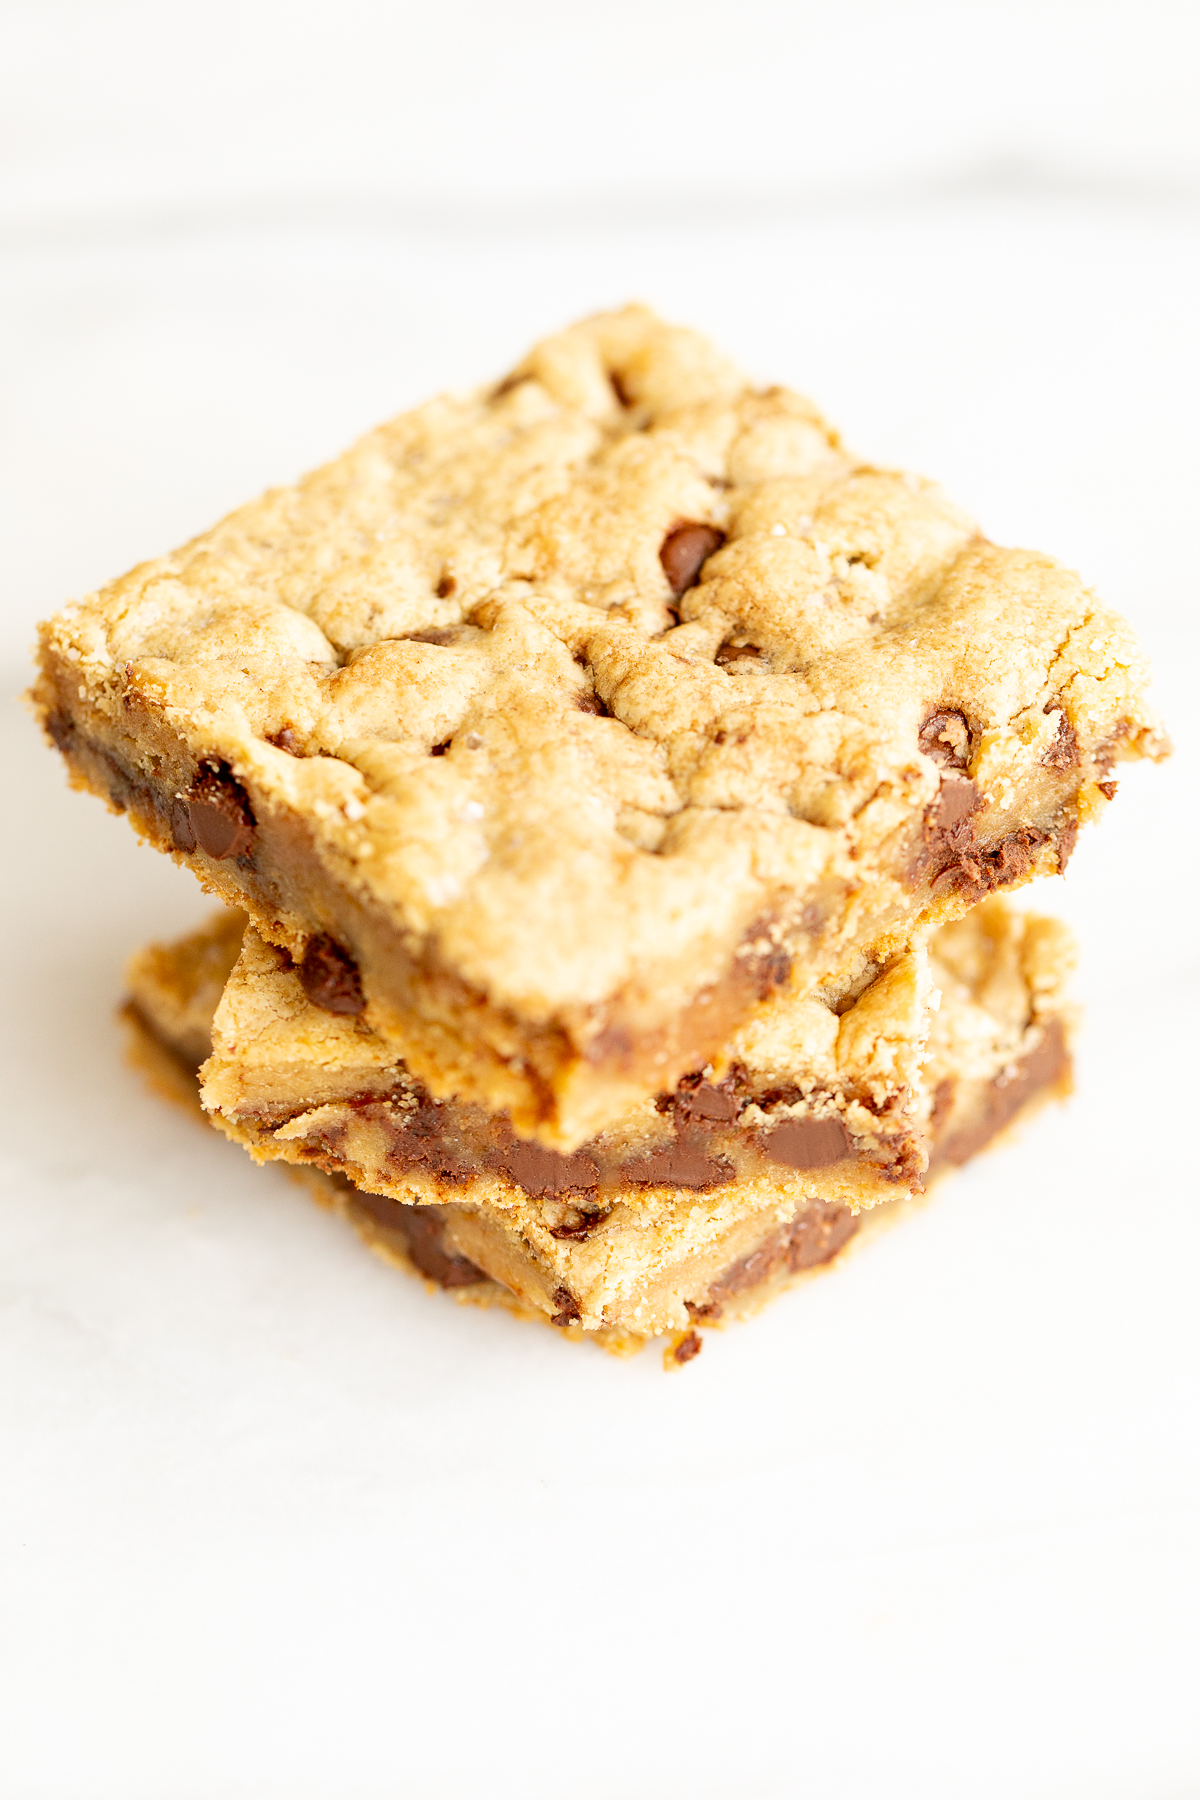 Salted caramel chocolate chip cookie bars cut into squares on a white surface.